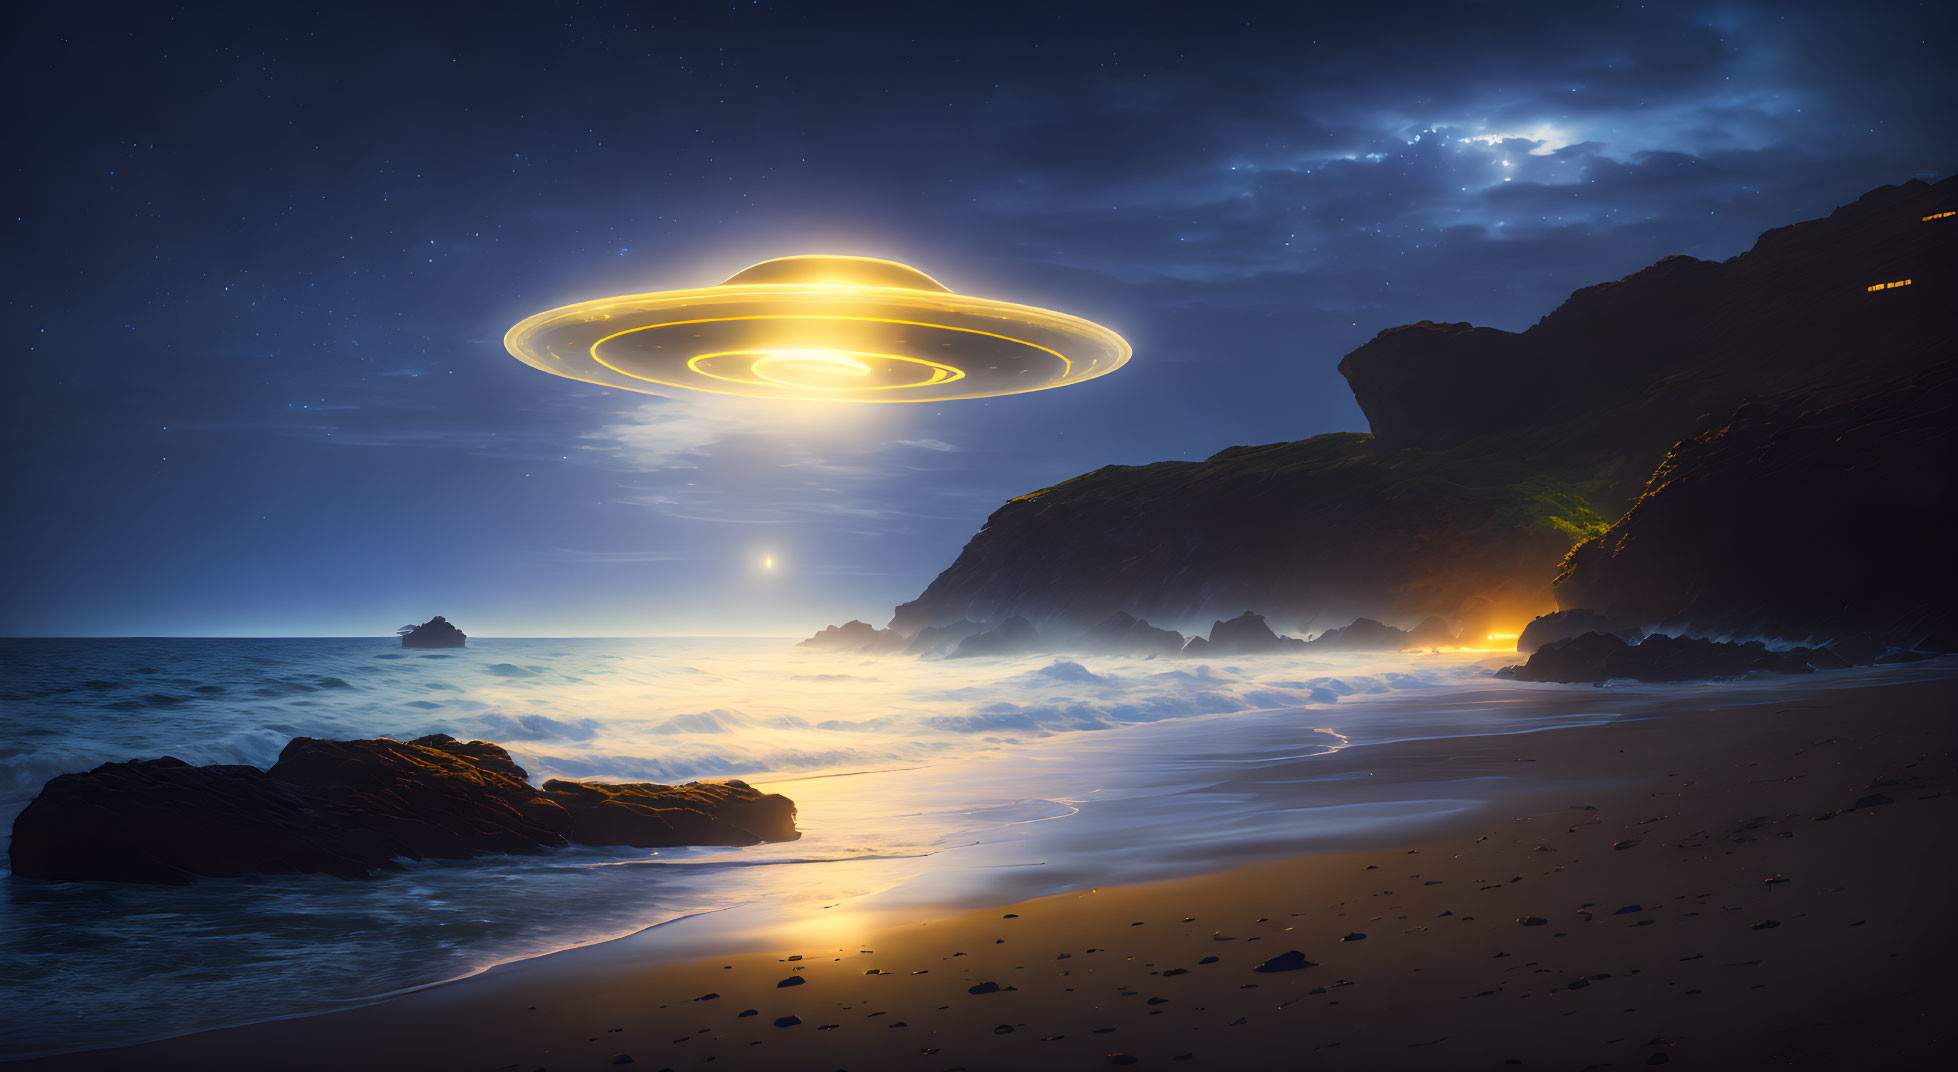 Mysterious UFO over serene beach at night with glowing rocks